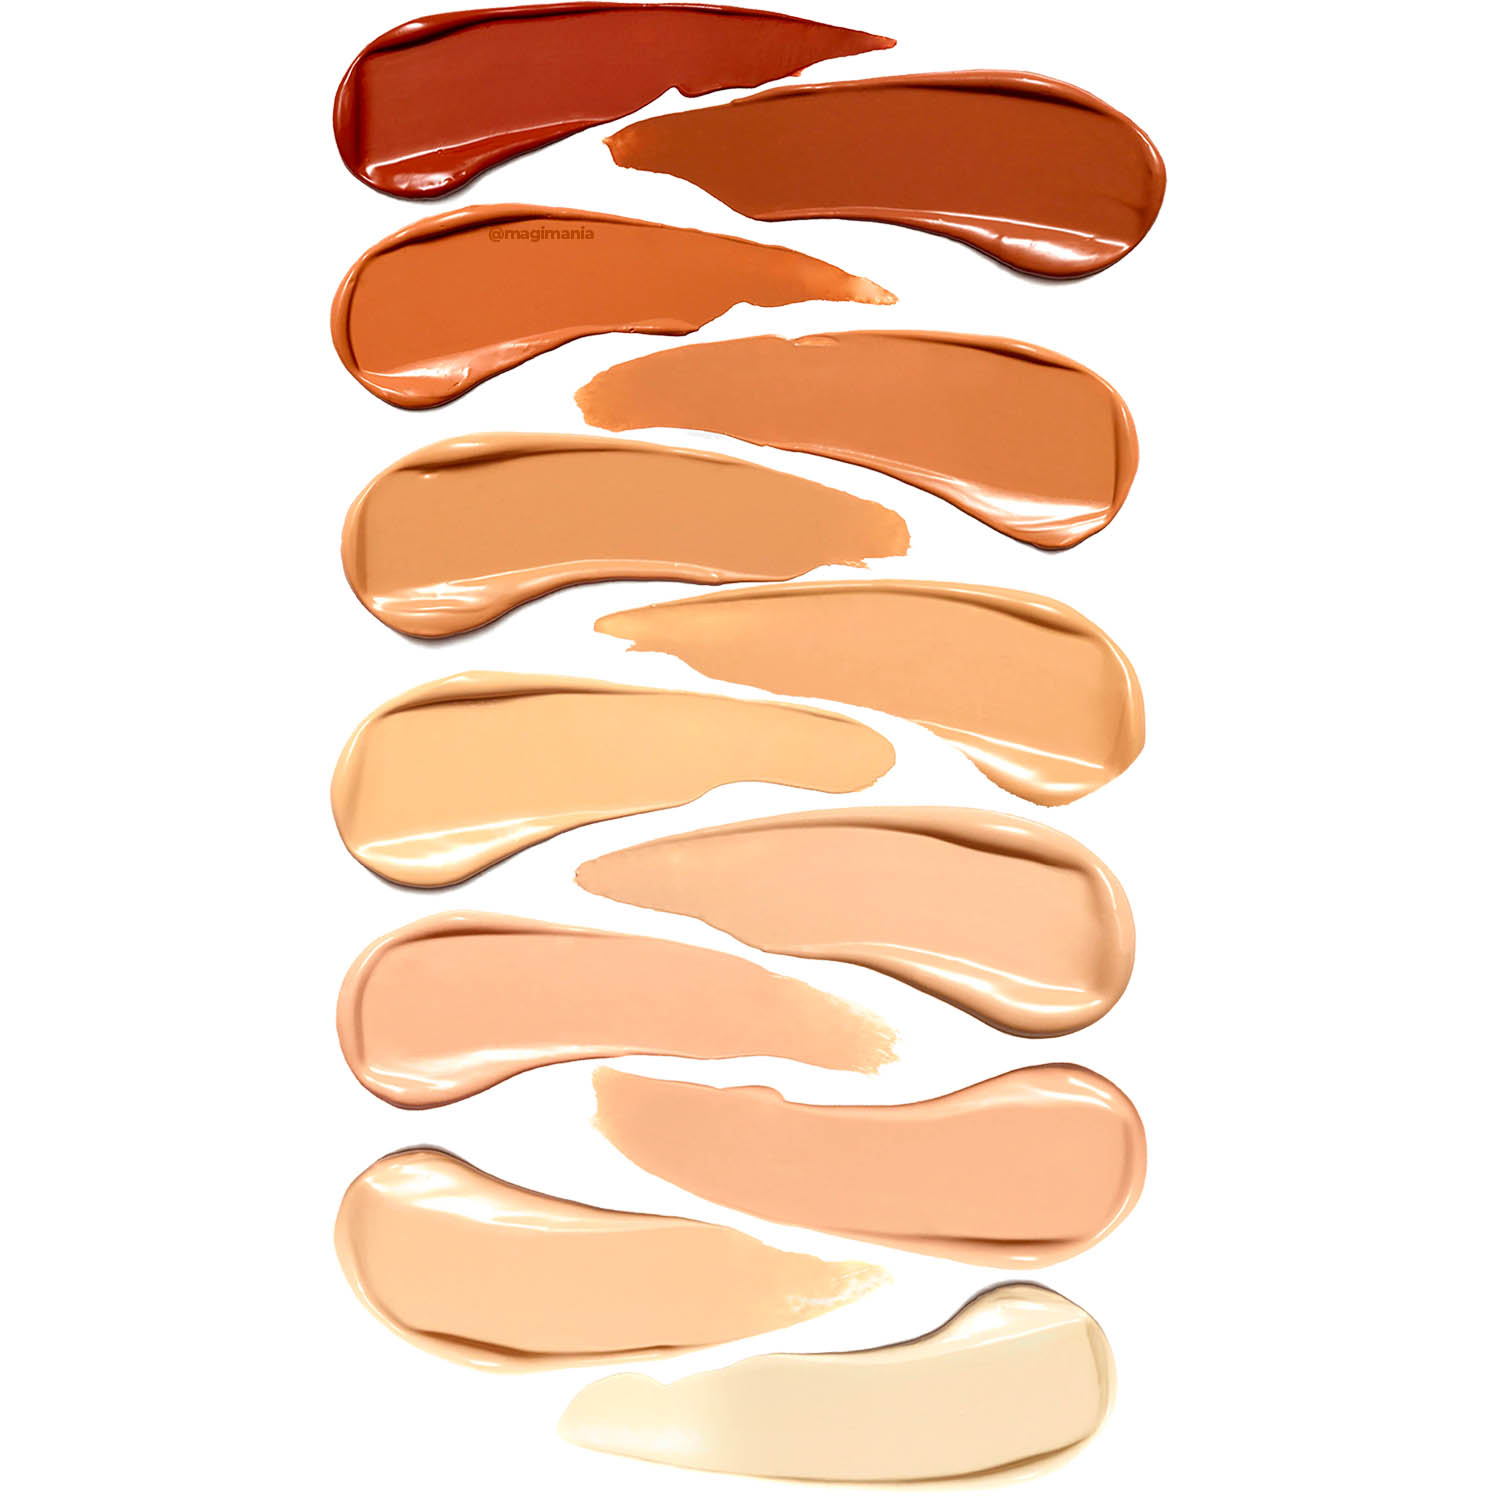 3INA The 24h Concealer Swatches